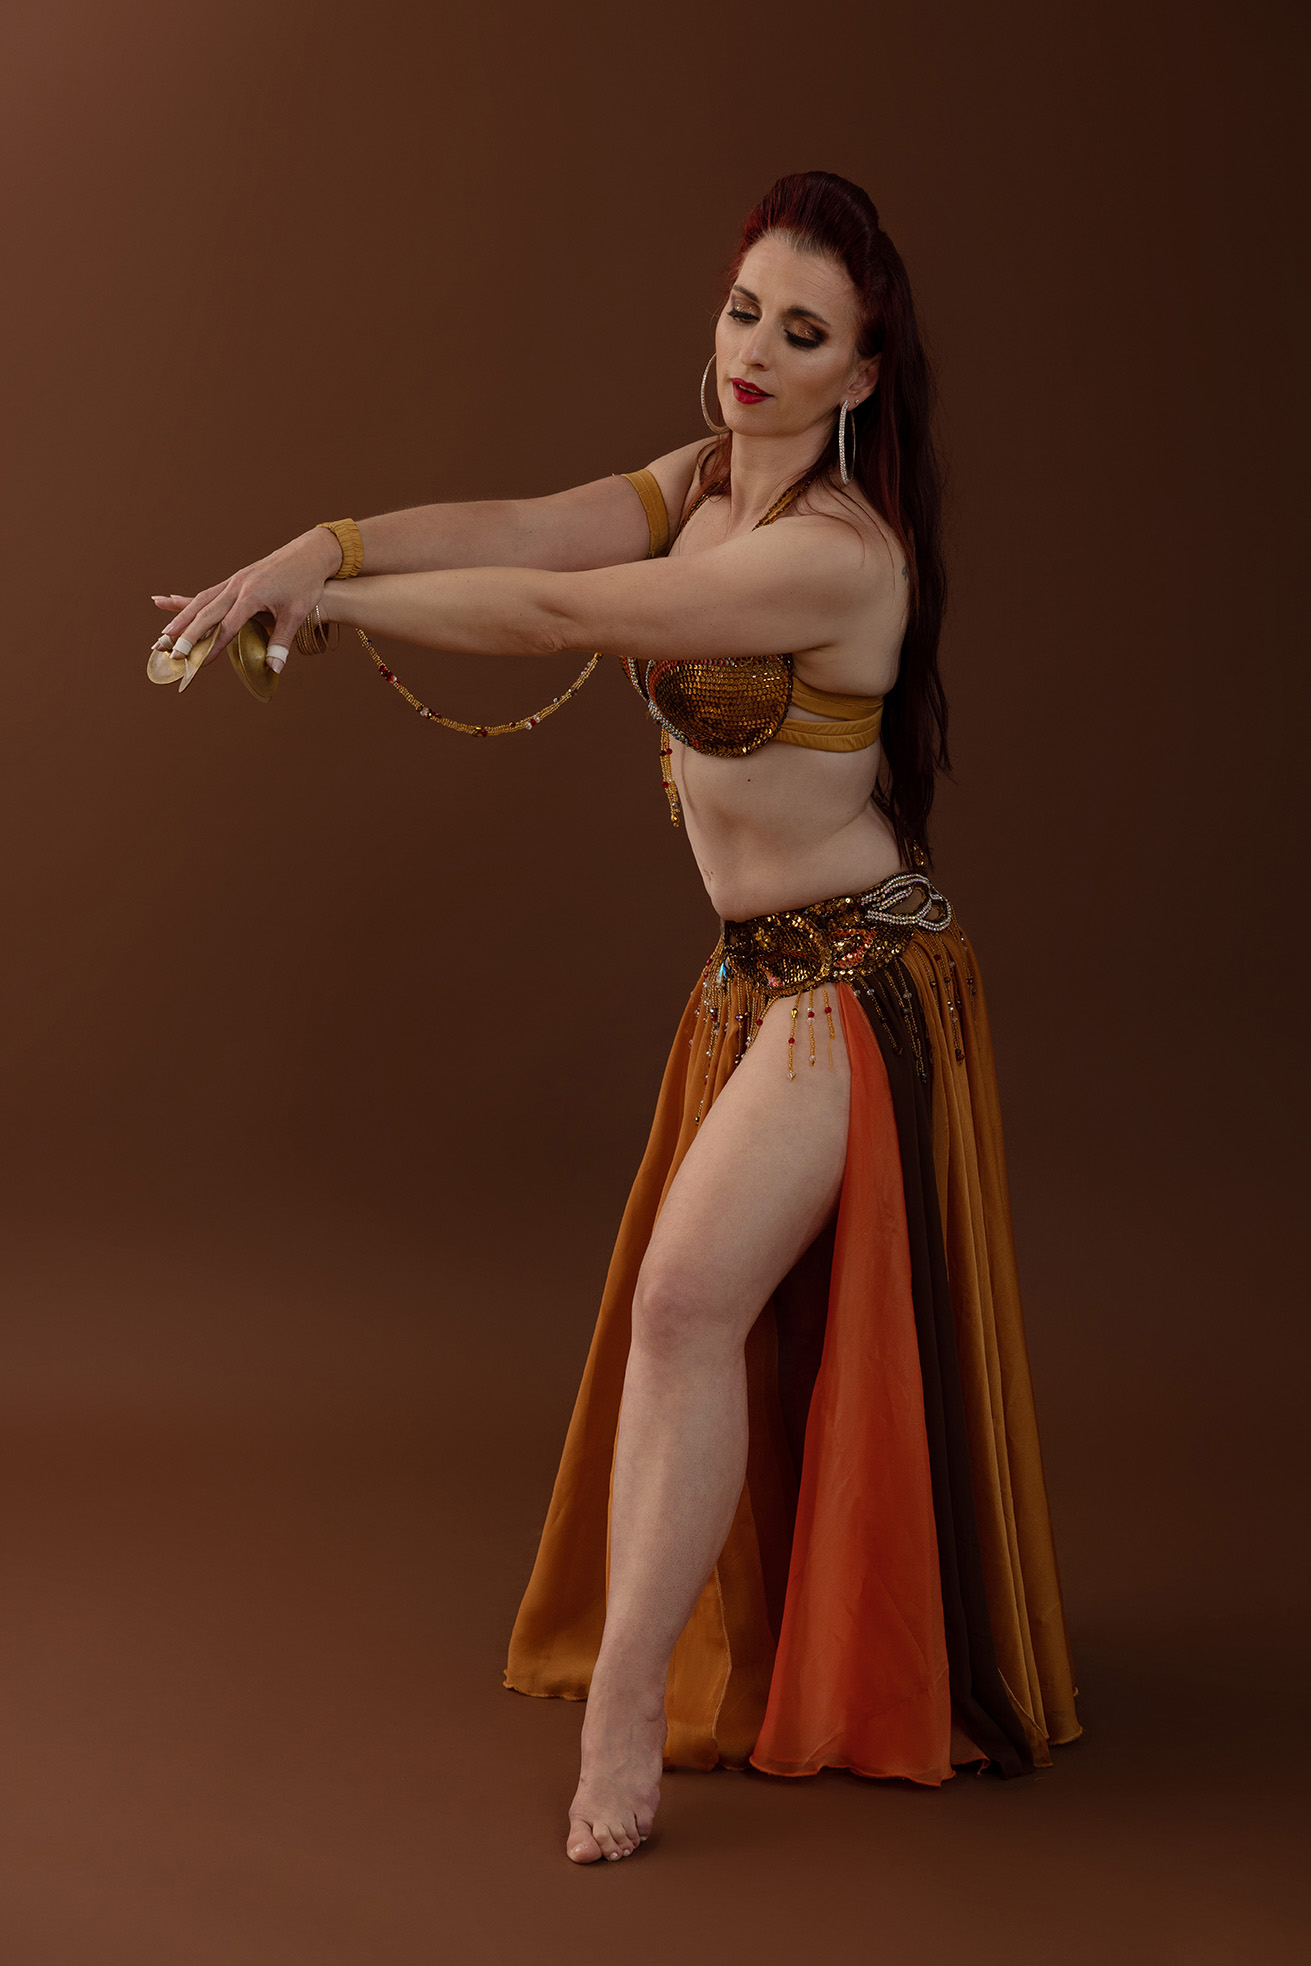 Amanda posting in an orange 2 piece belly dance costume, facing to the left with both arms extended towards the left with finger cymbals on her fingers. She has one leg out from a split in the skirt.